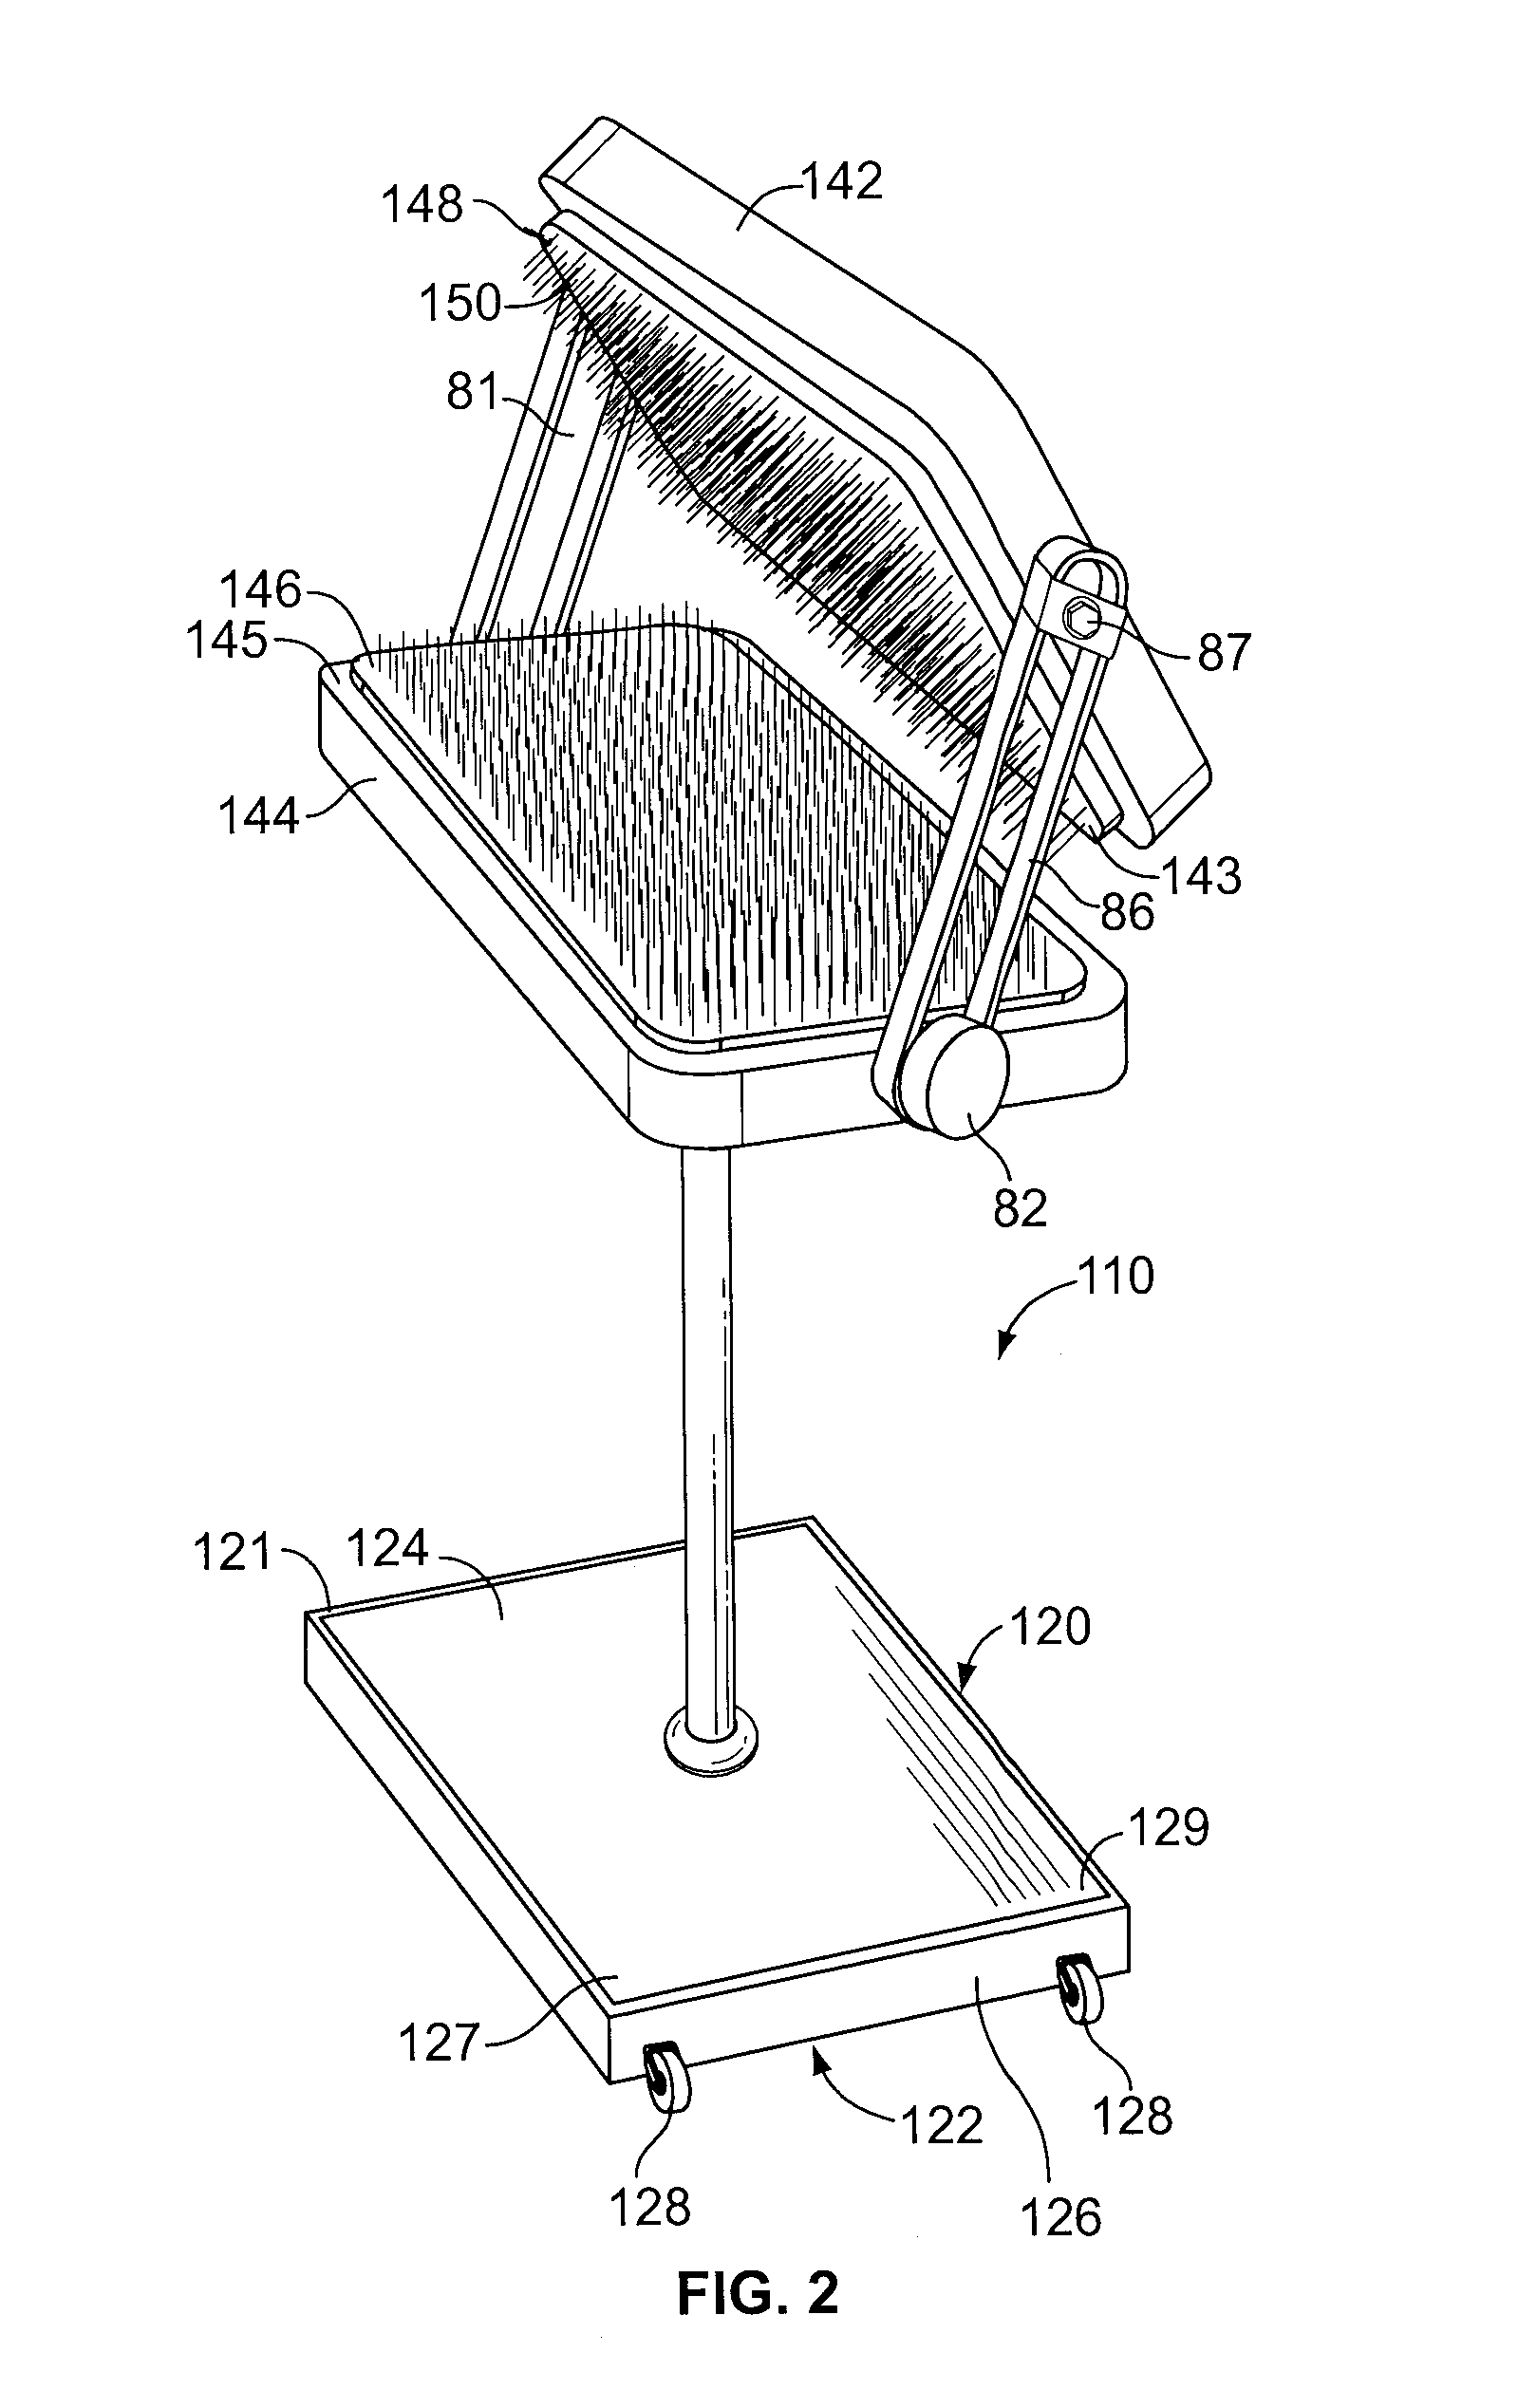 Hair styling device